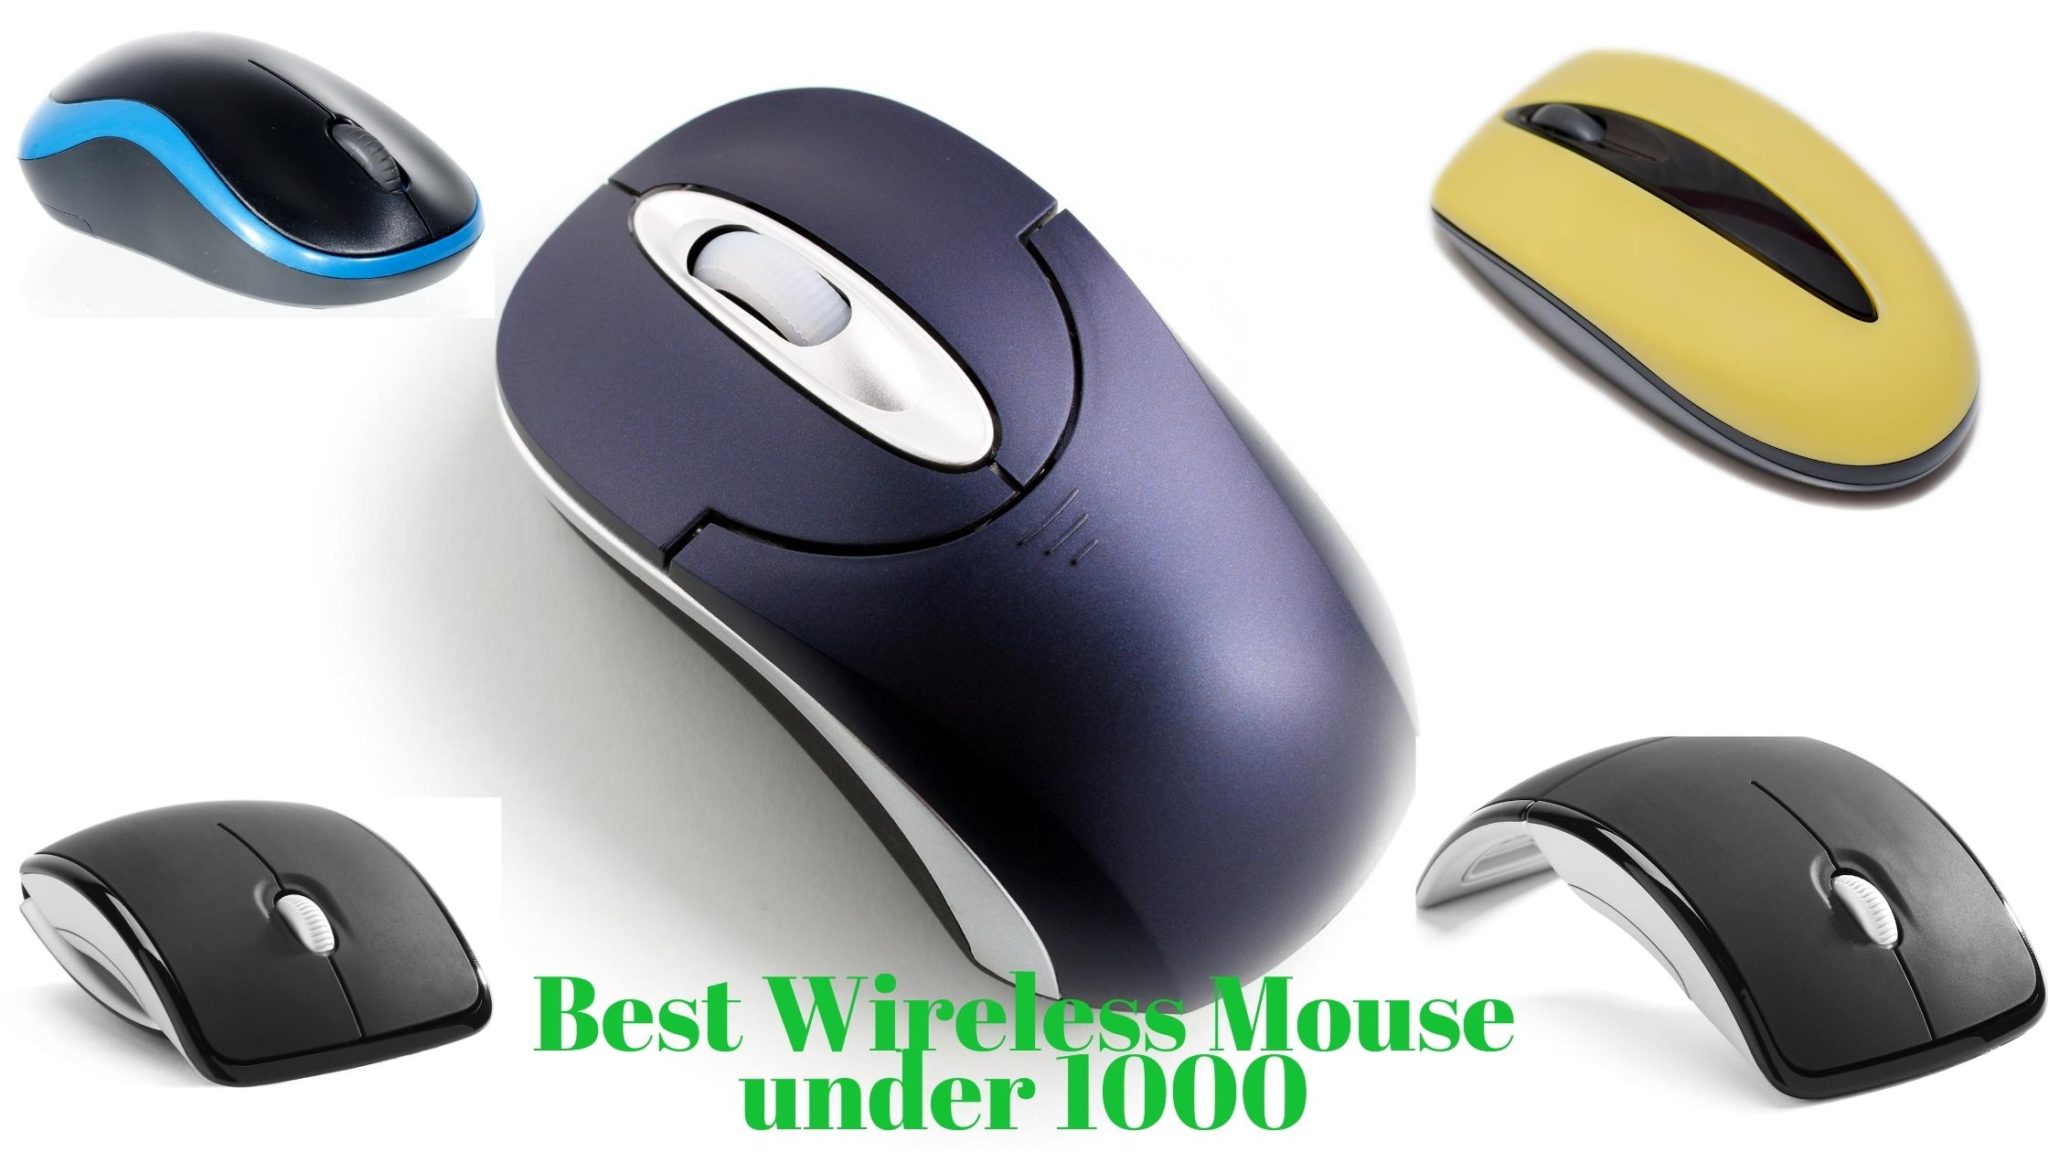 microsoft wireless mouse 1000 without receiver